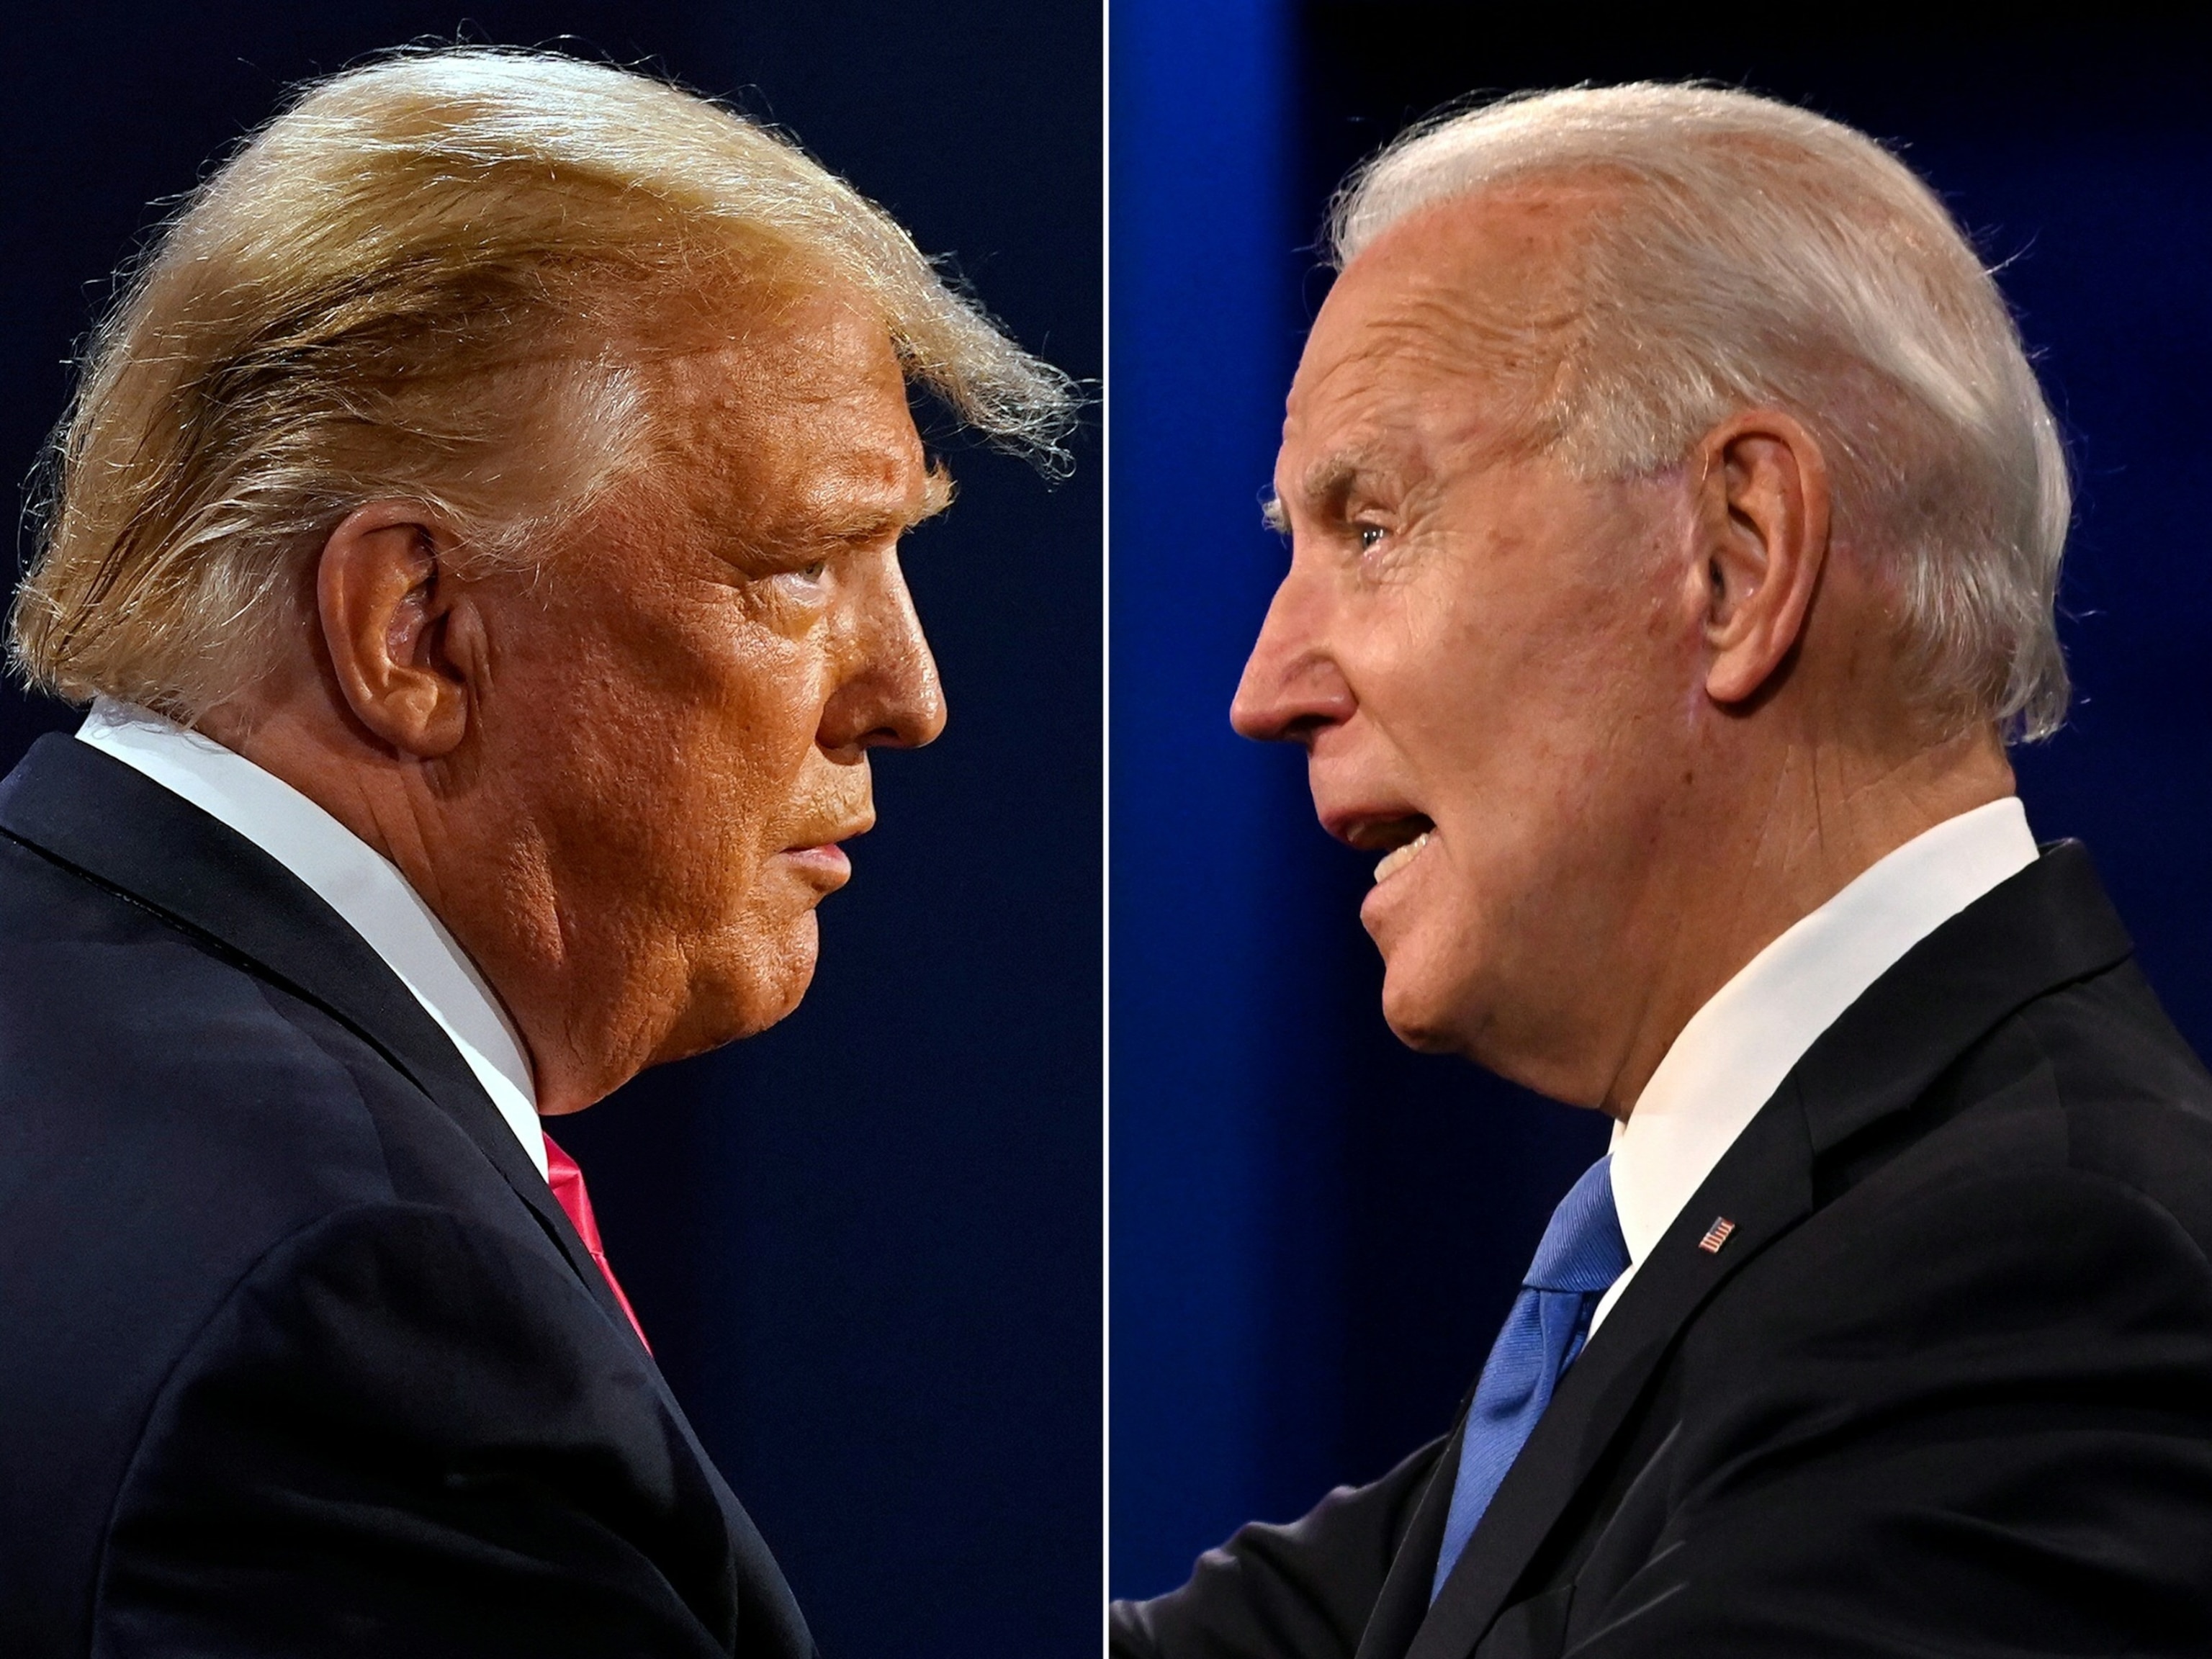 PHOTO: This combination of pictures shows President Donald Trump and Democratic Presidential candidate and former Vice President Joe Biden during the final presidential debate at Belmont University in Nashville, Tenn., on Oct. 22, 2020.